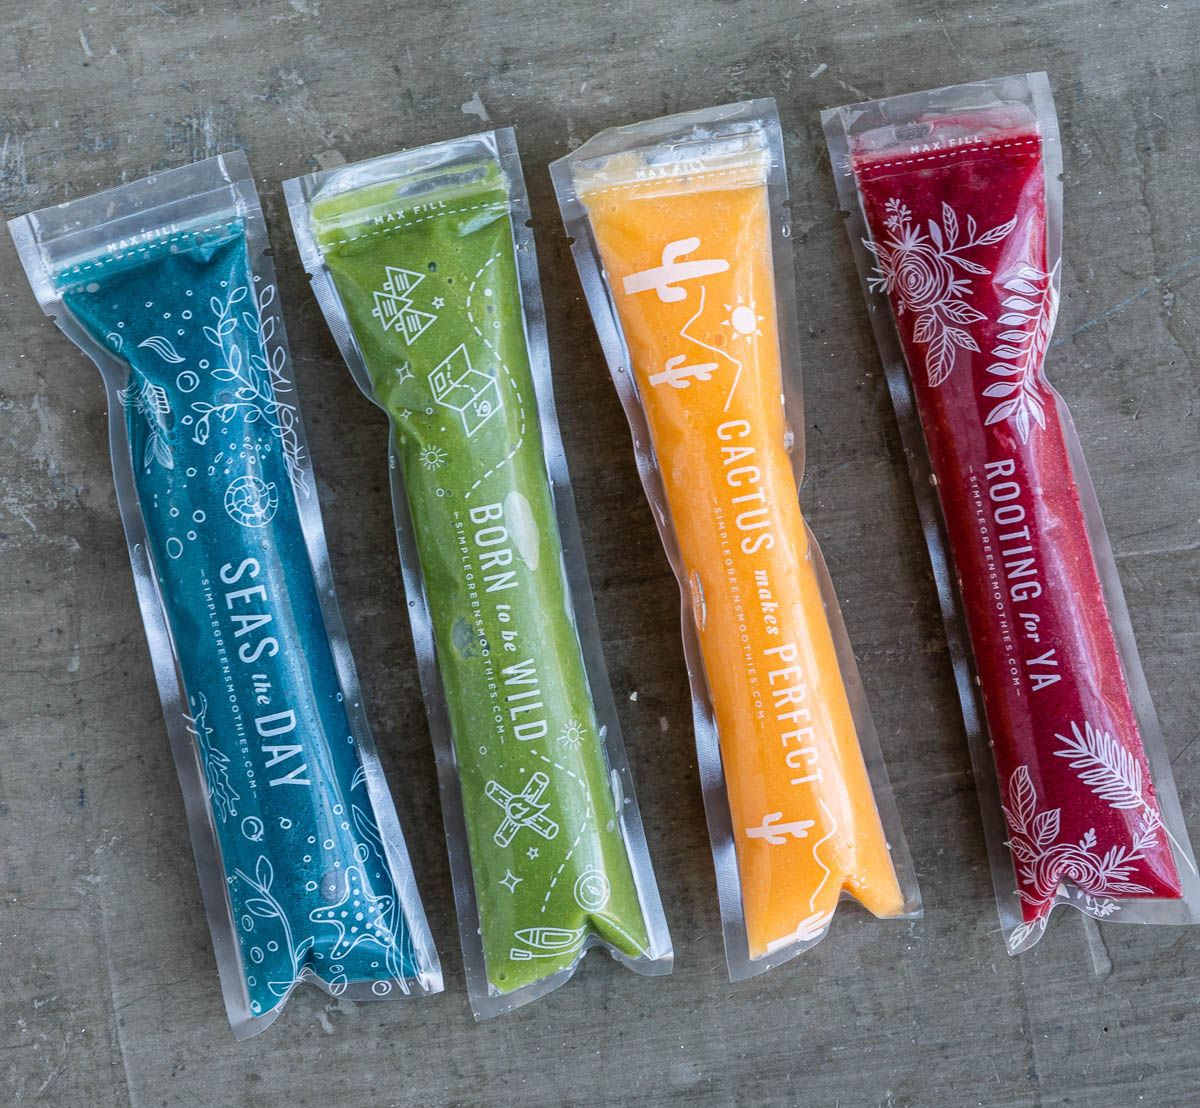 4 plastic sleeves filled with healthy homemade popsicles in blue, green, yellow and red.